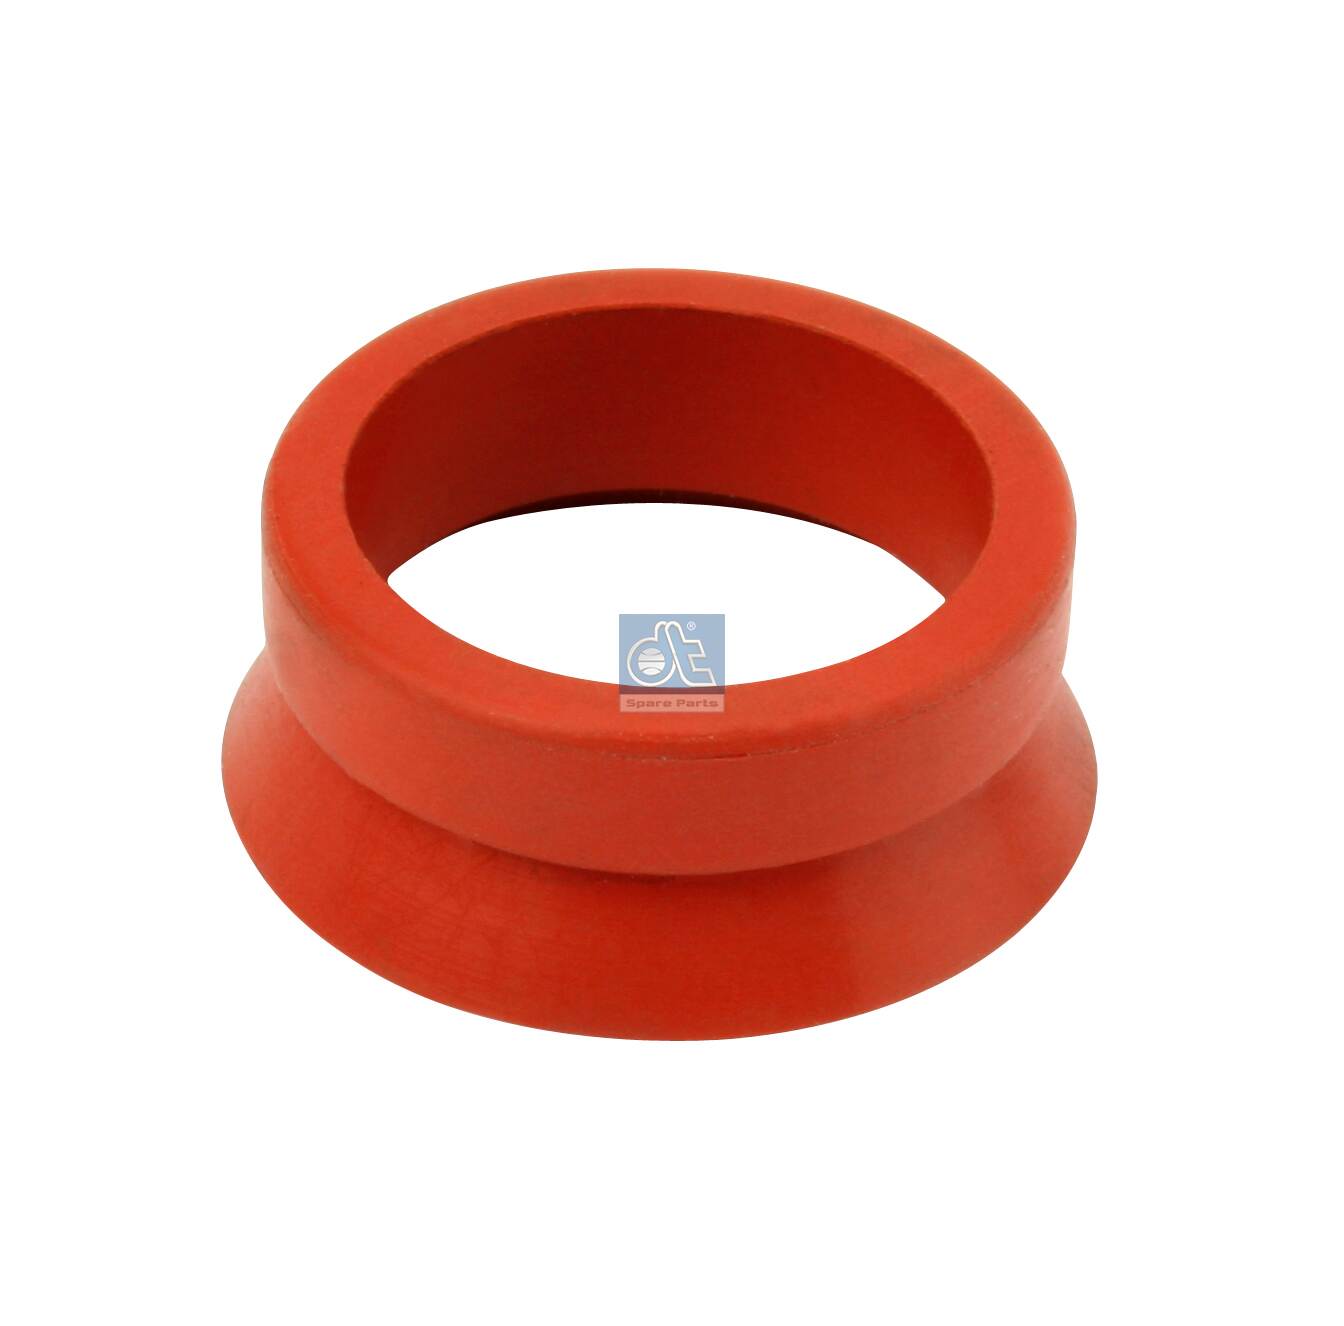 2.12200, Seal Ring, DT Spare Parts, Volvo Truck & Bus Marine & Industry TD60* TD61* TD63* TD70* TD71* TD73* TD100* TD101* TD102* TD120* TD121* TD122* TD123* D6A D7A D7B D7C D10A, 469455, 948965, 032.141, 07847, 11867, 1242476, 28093.05, 70-31082-00, 71574, VOLVO469455, 02.03.99.218810, 36294DPH, EPL-455